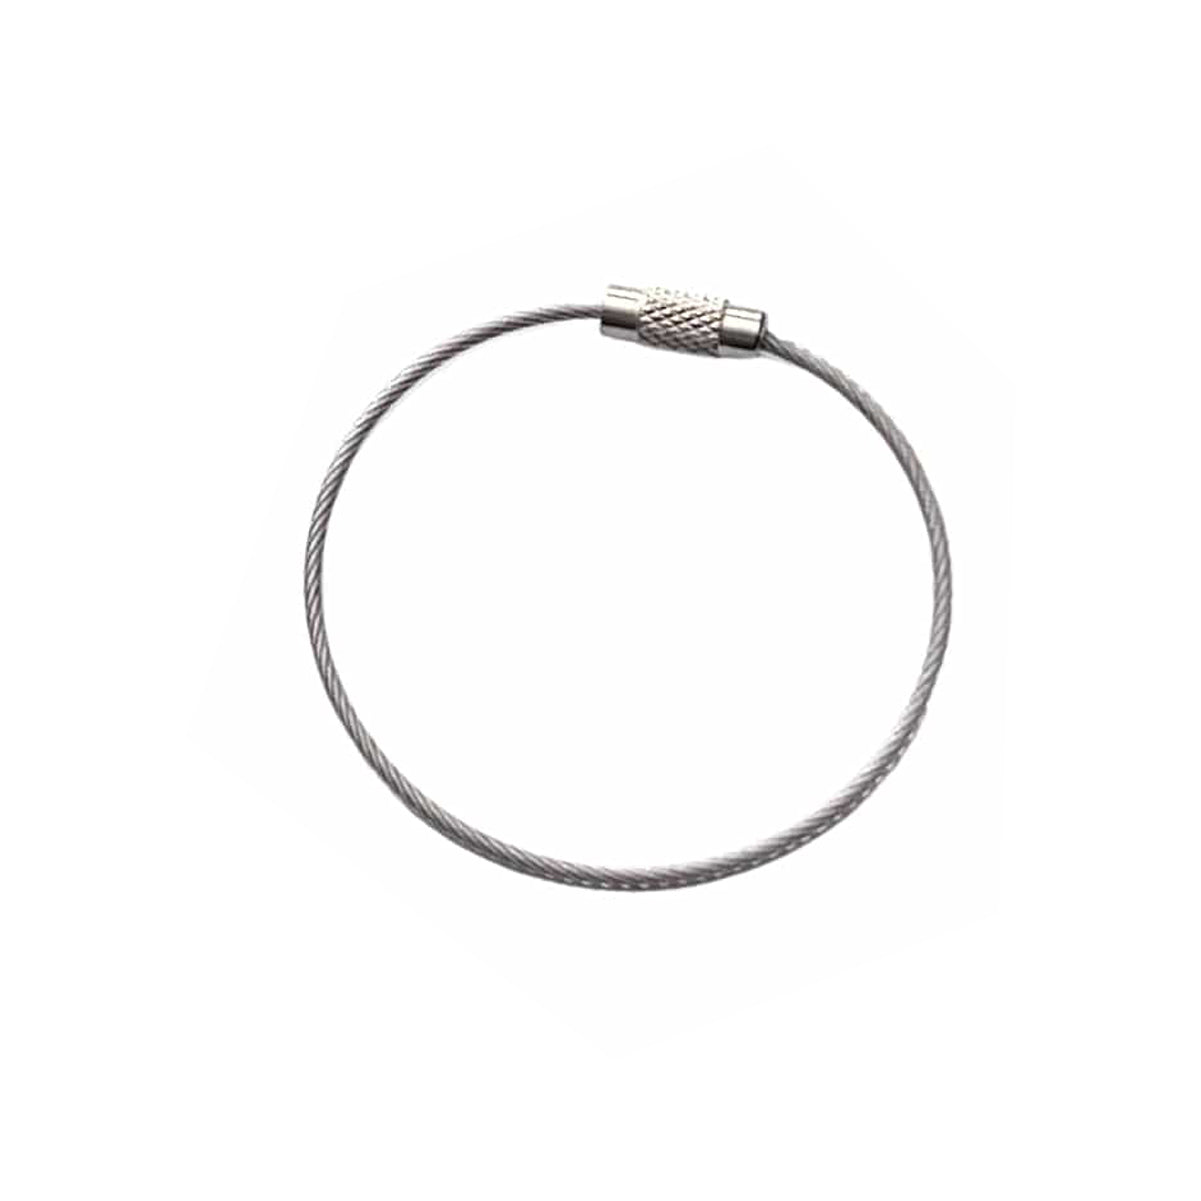 Cable Loop Luggage Tag Holders - 6 inch Metal Stainless Steel Wire Ring Connectors SPID-8170